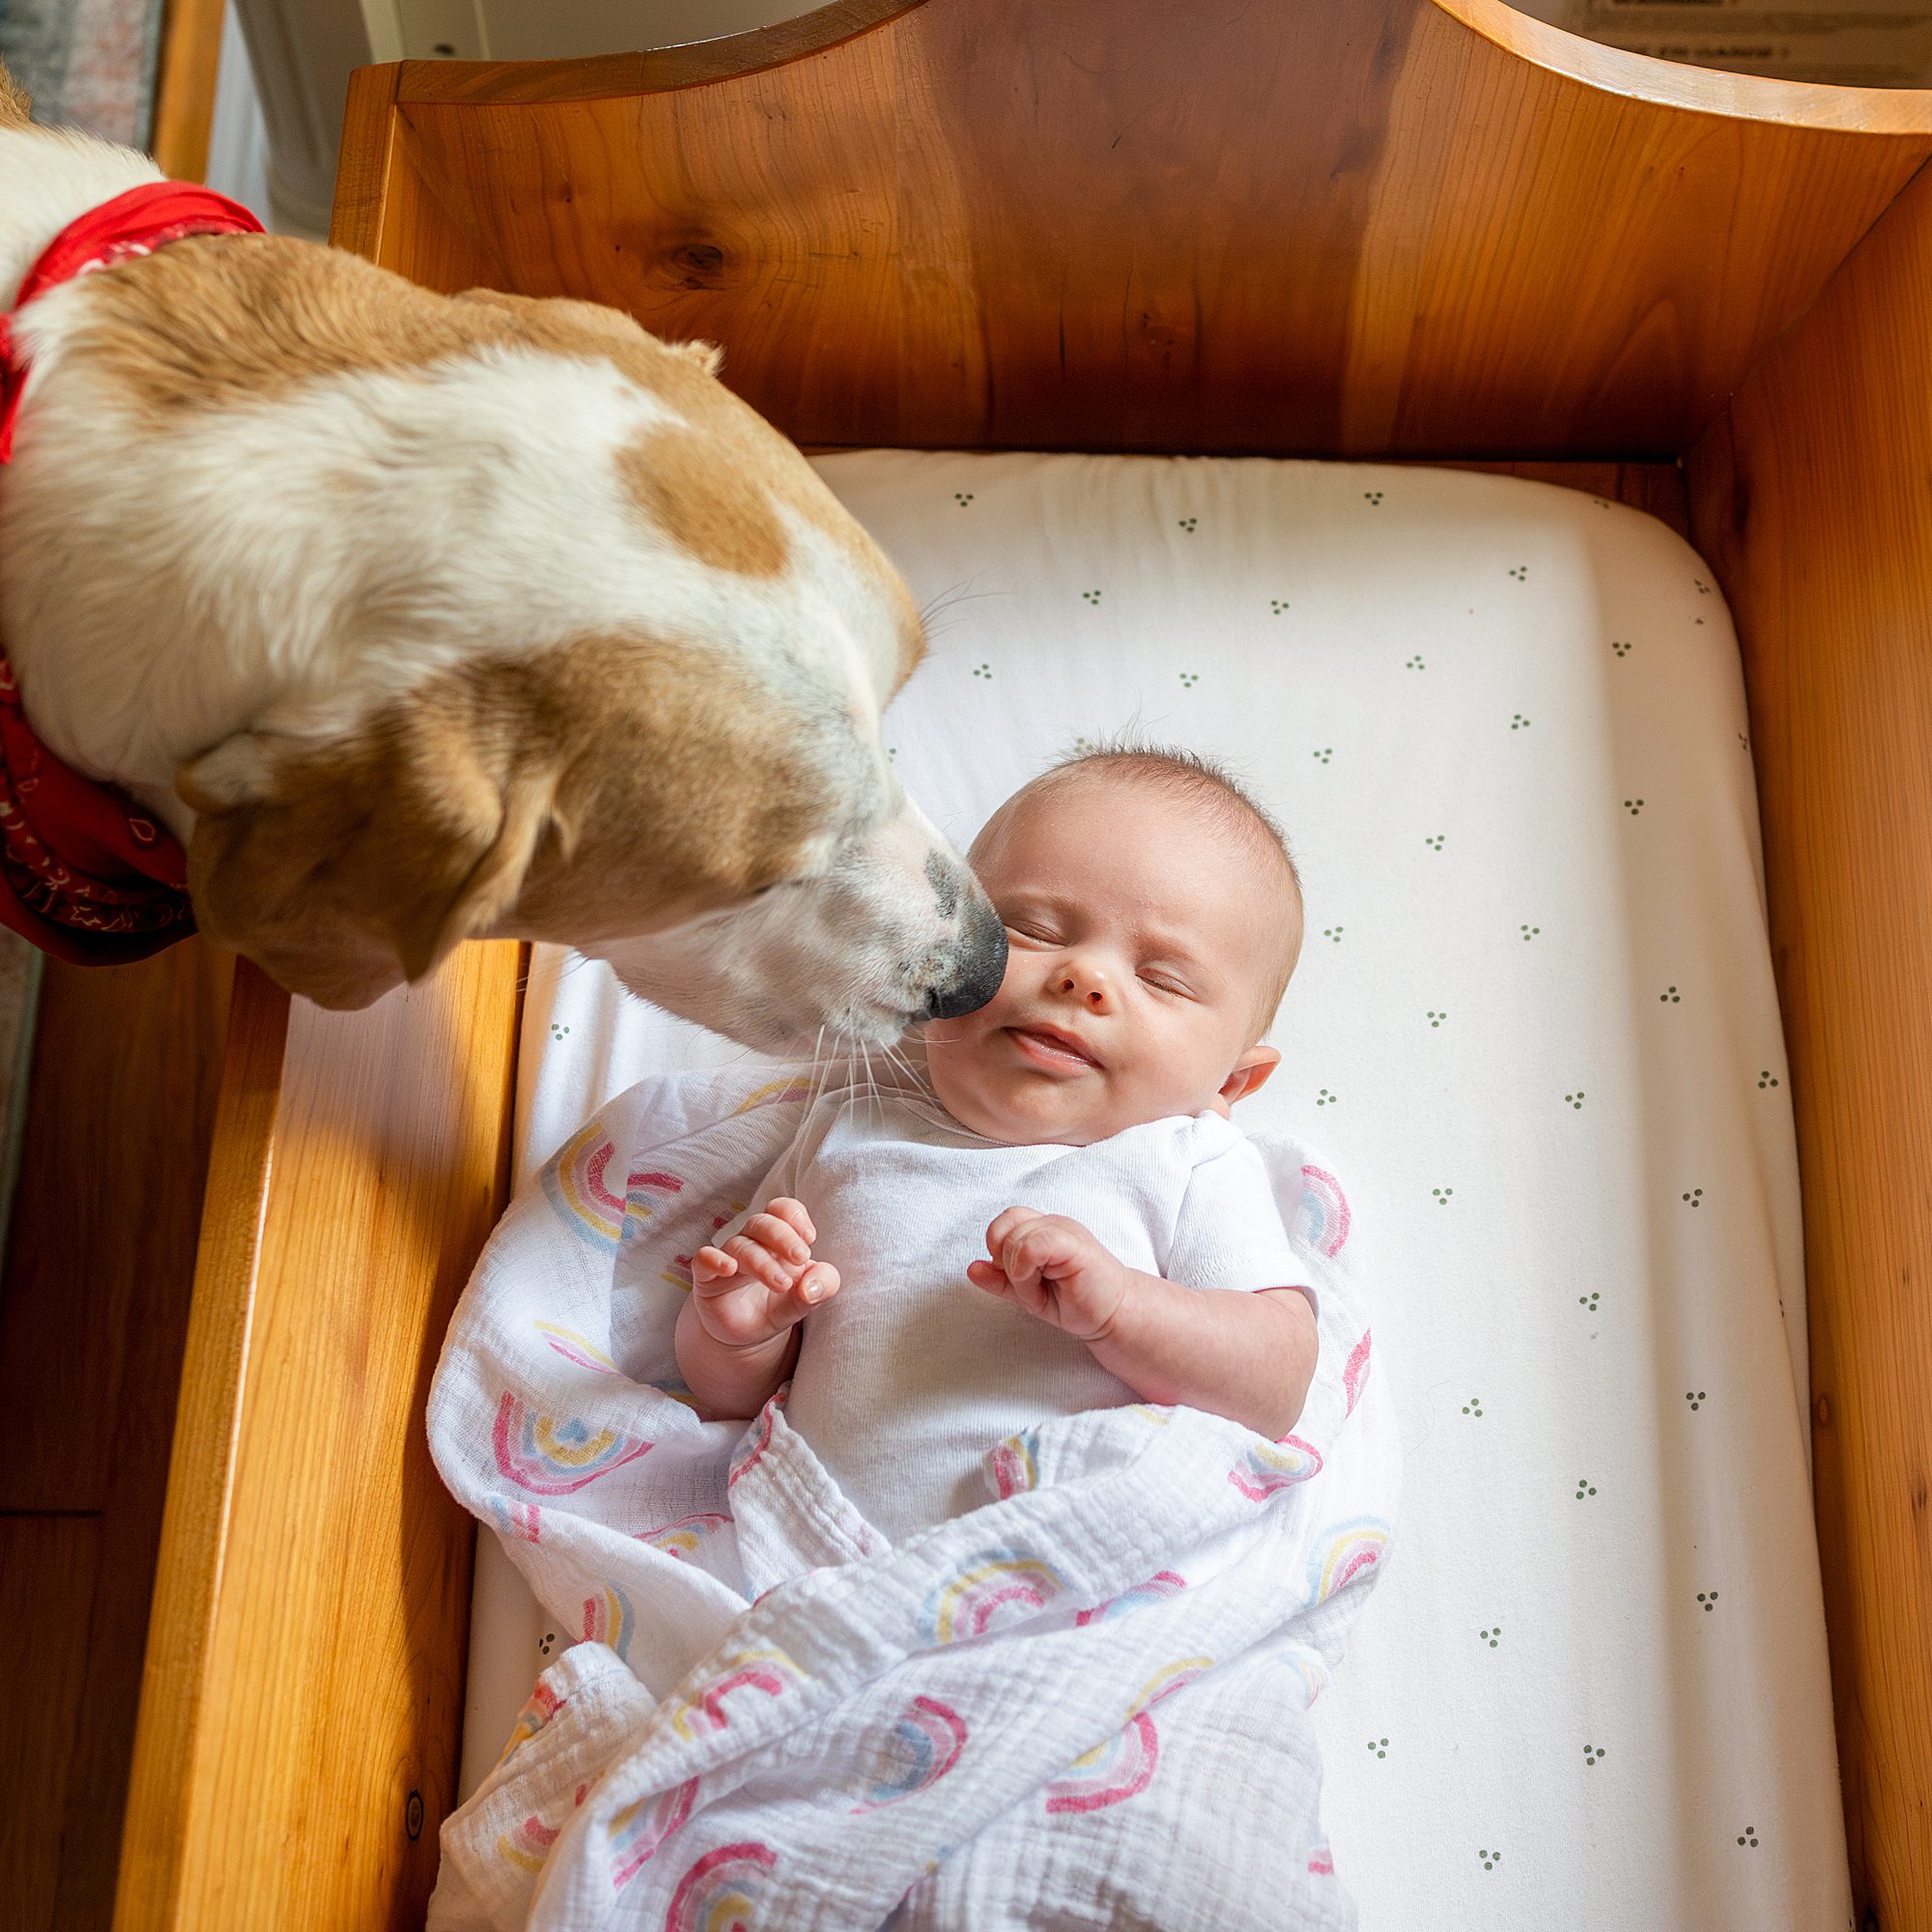 A dog is kissing a baby in a crib.